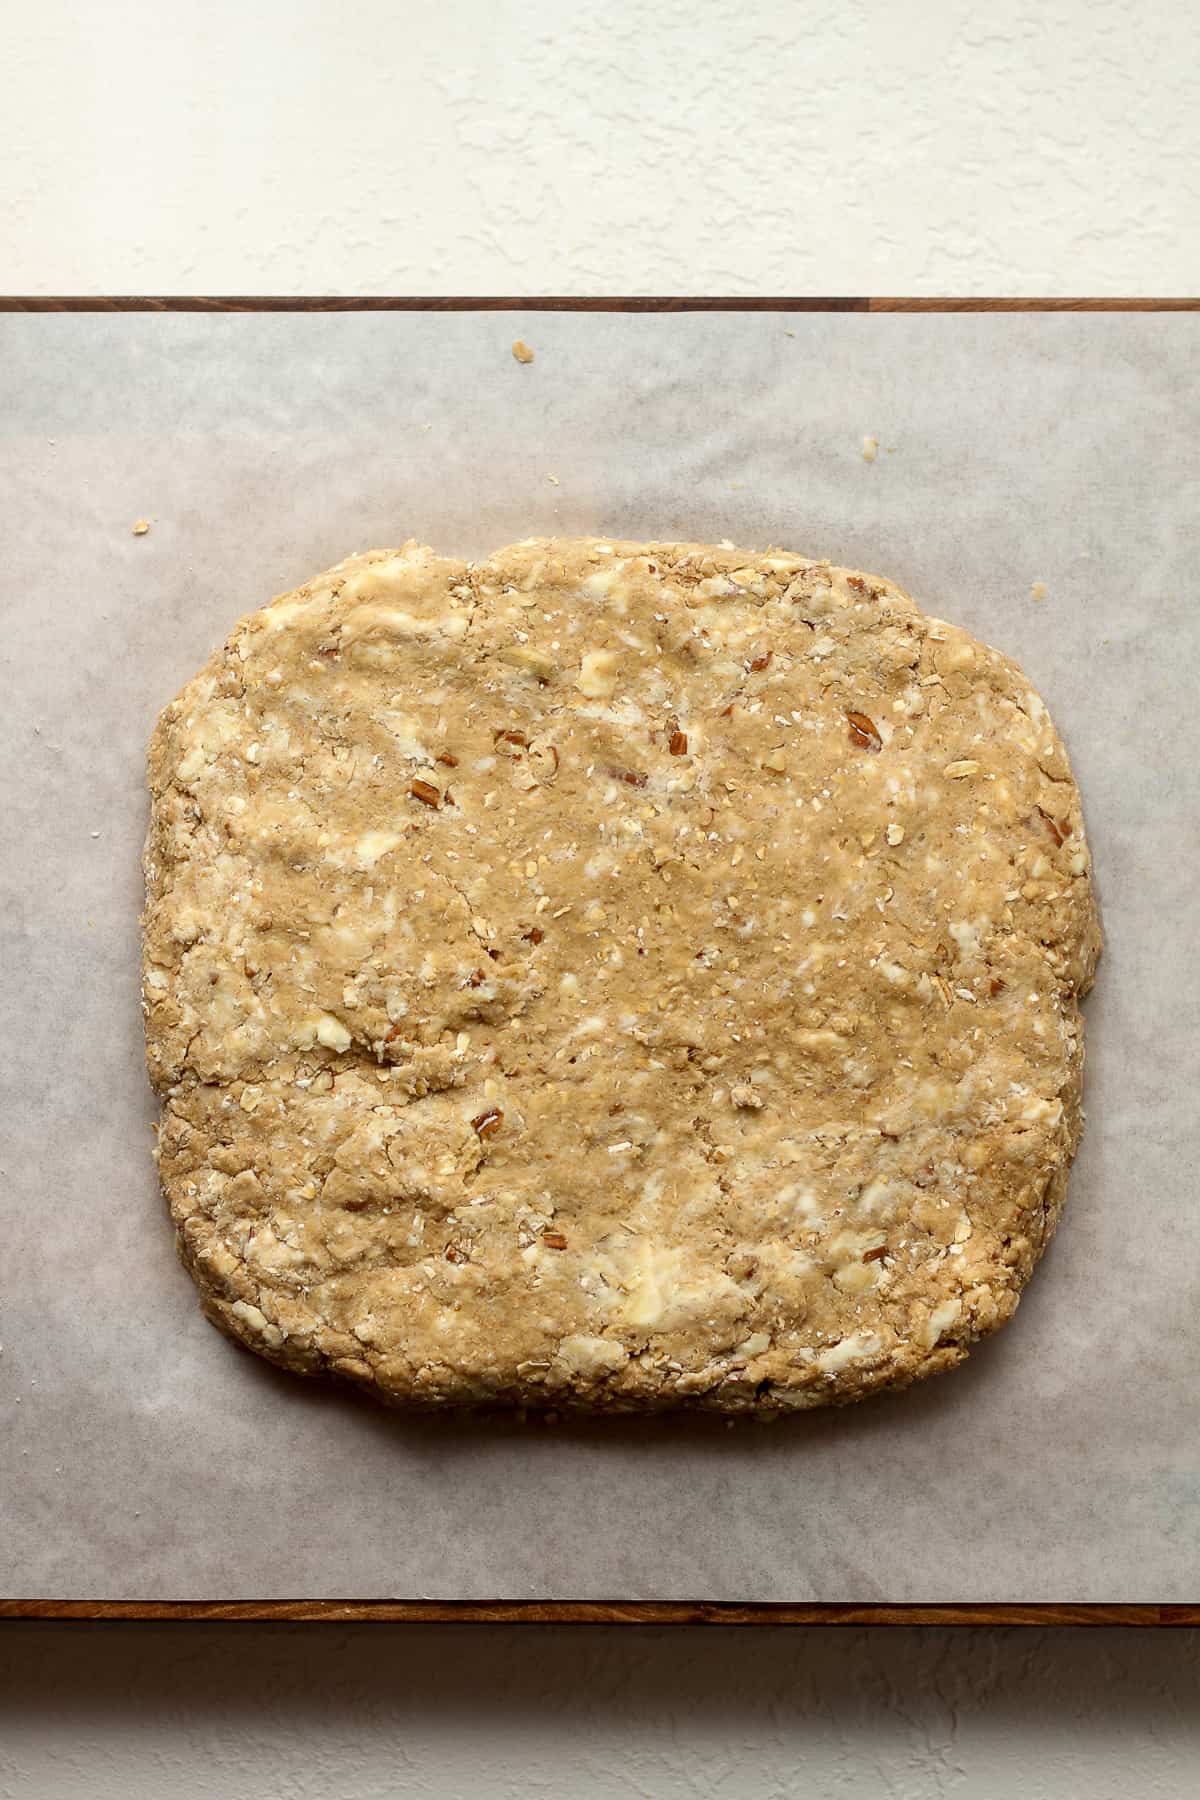 Overhead view of a square of scone dough.